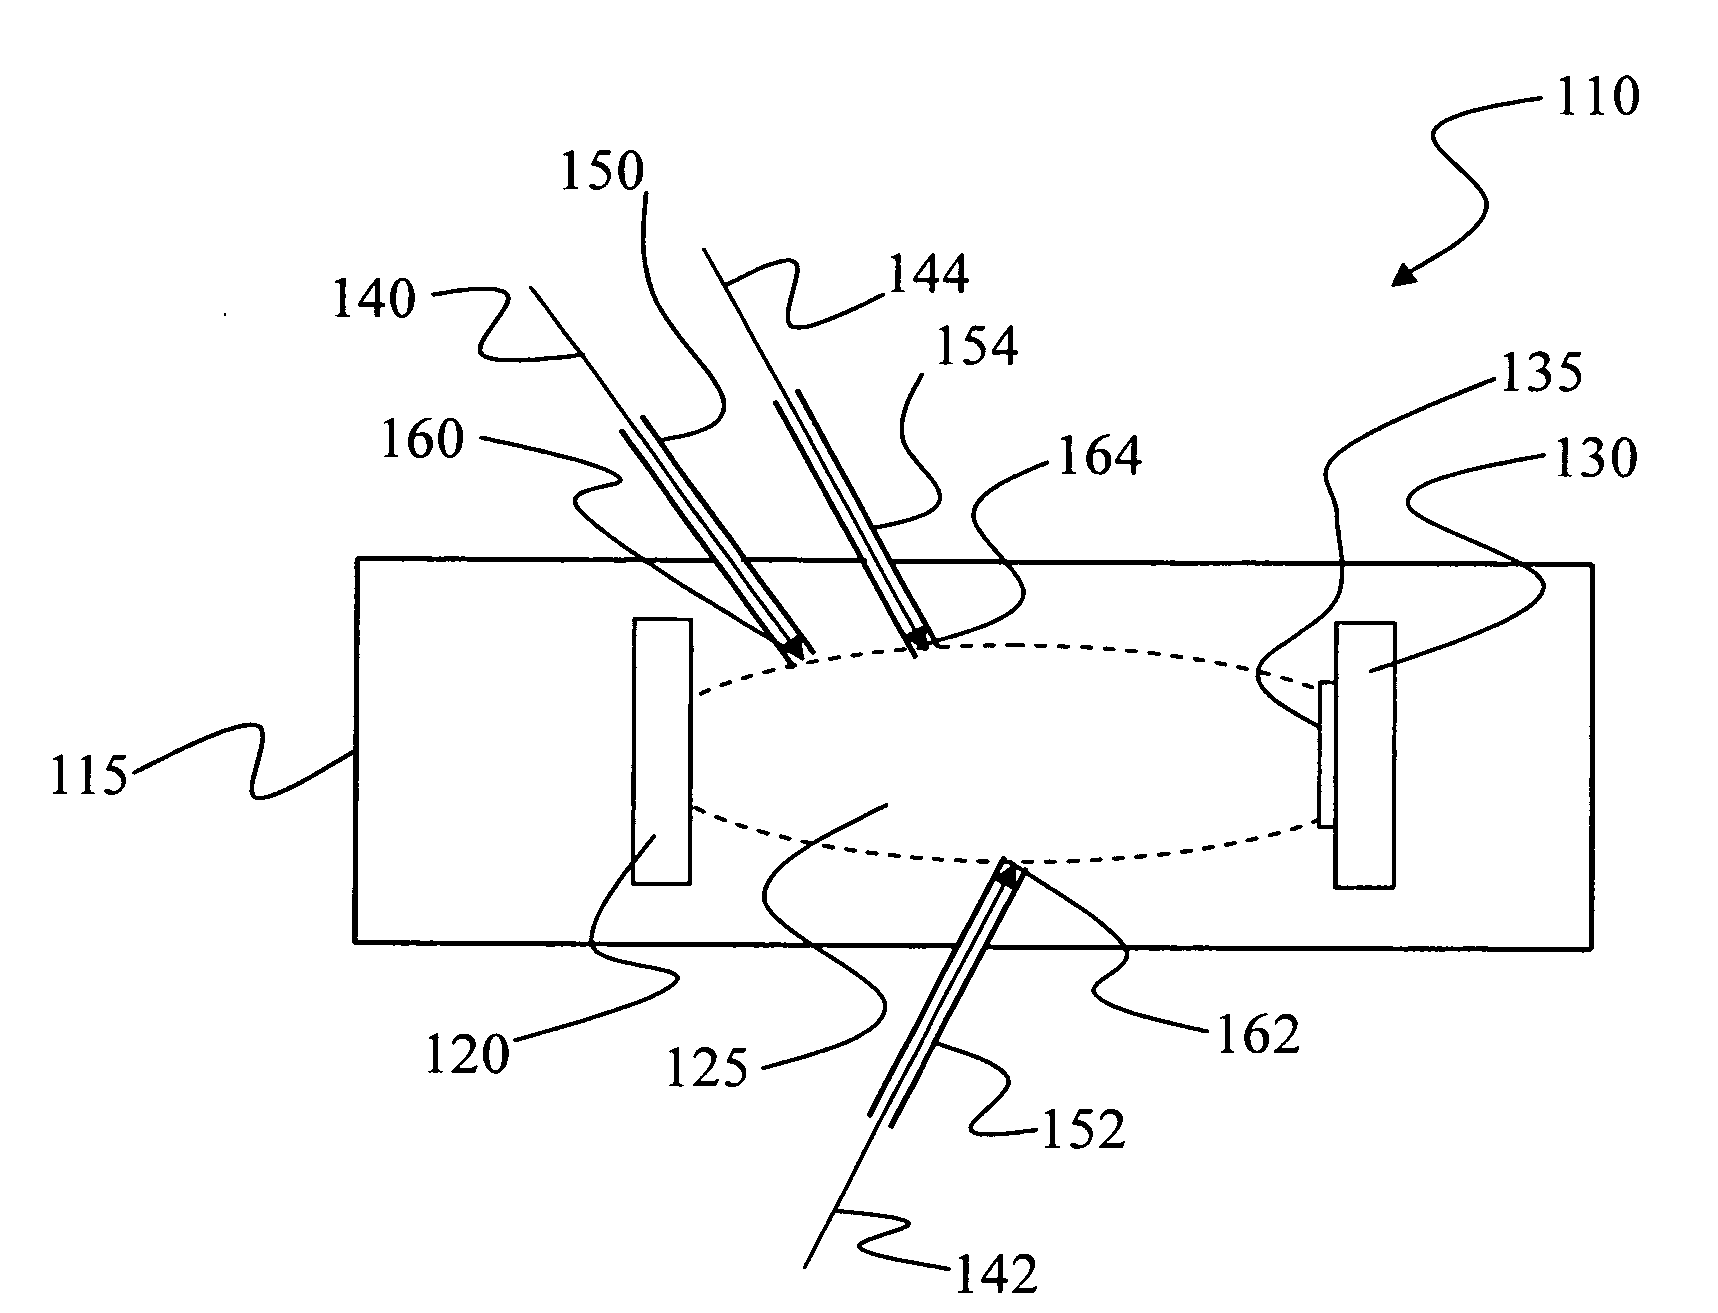 Thin film deposition via a spatially-coordinated and time-synchronized process